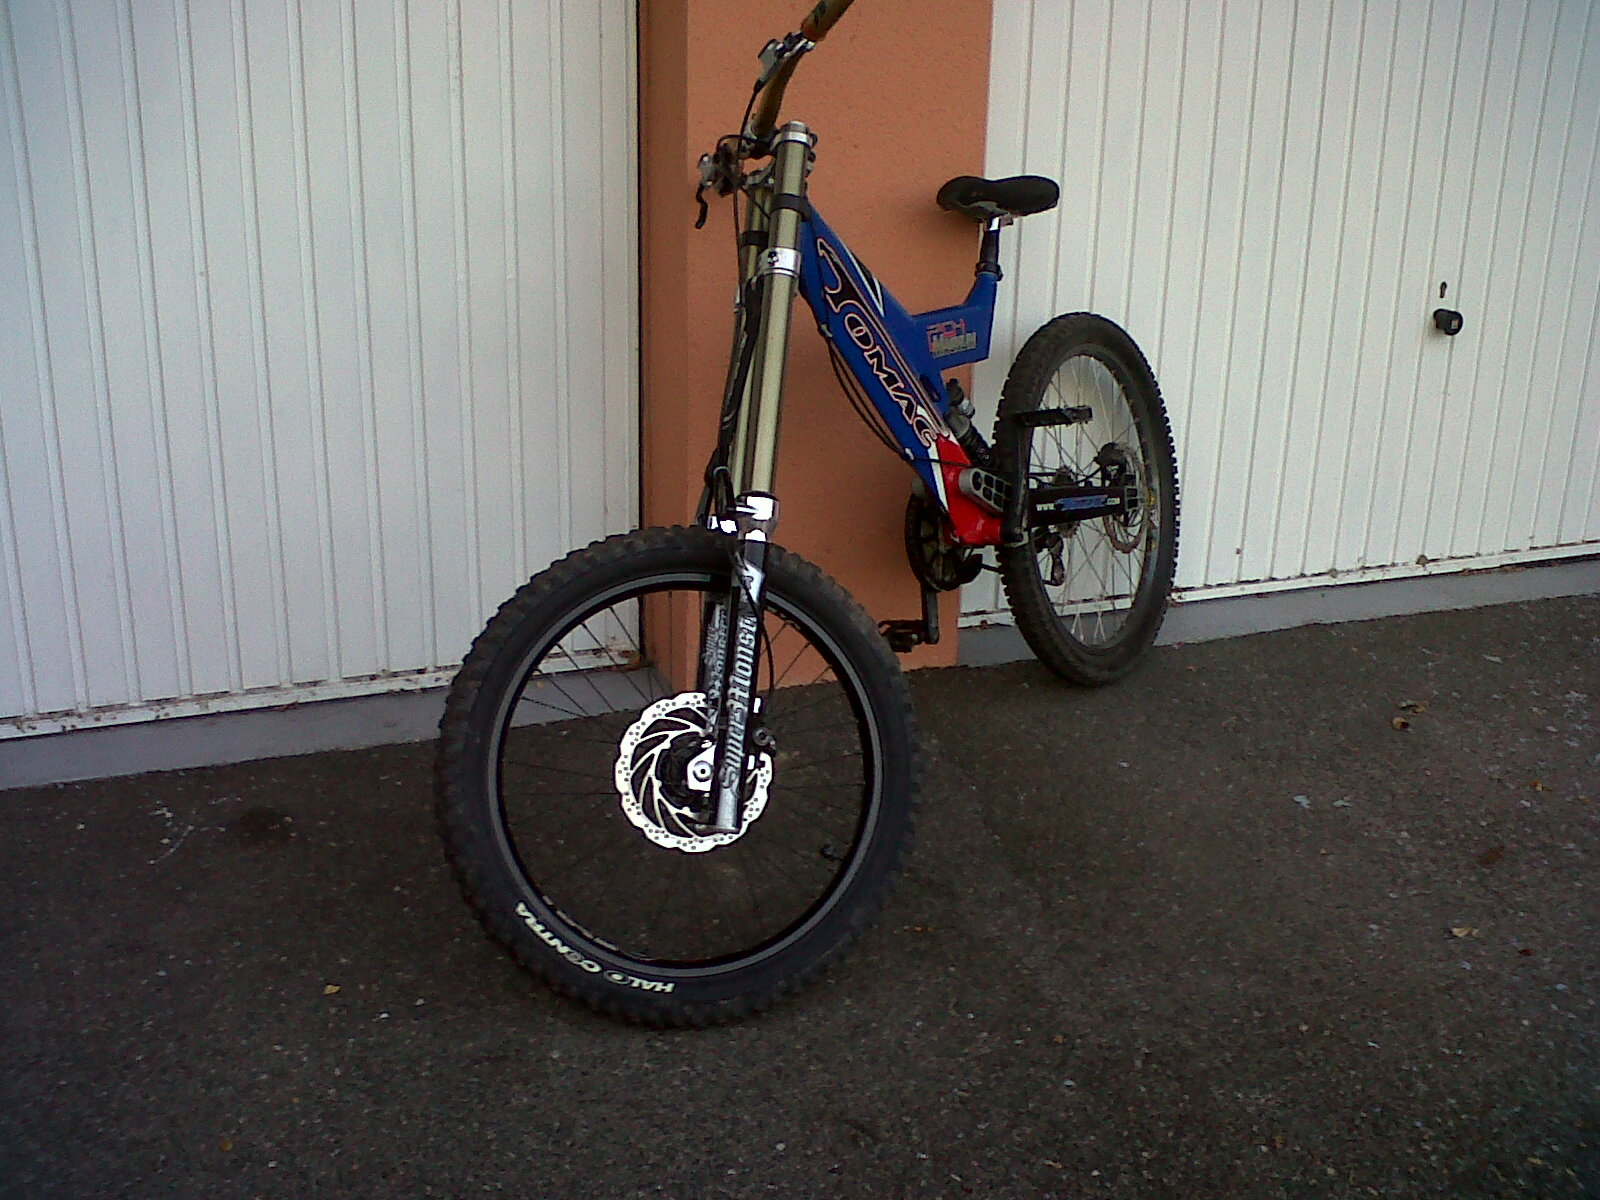 my new frame tomac 204 magnum with super monsters !!!